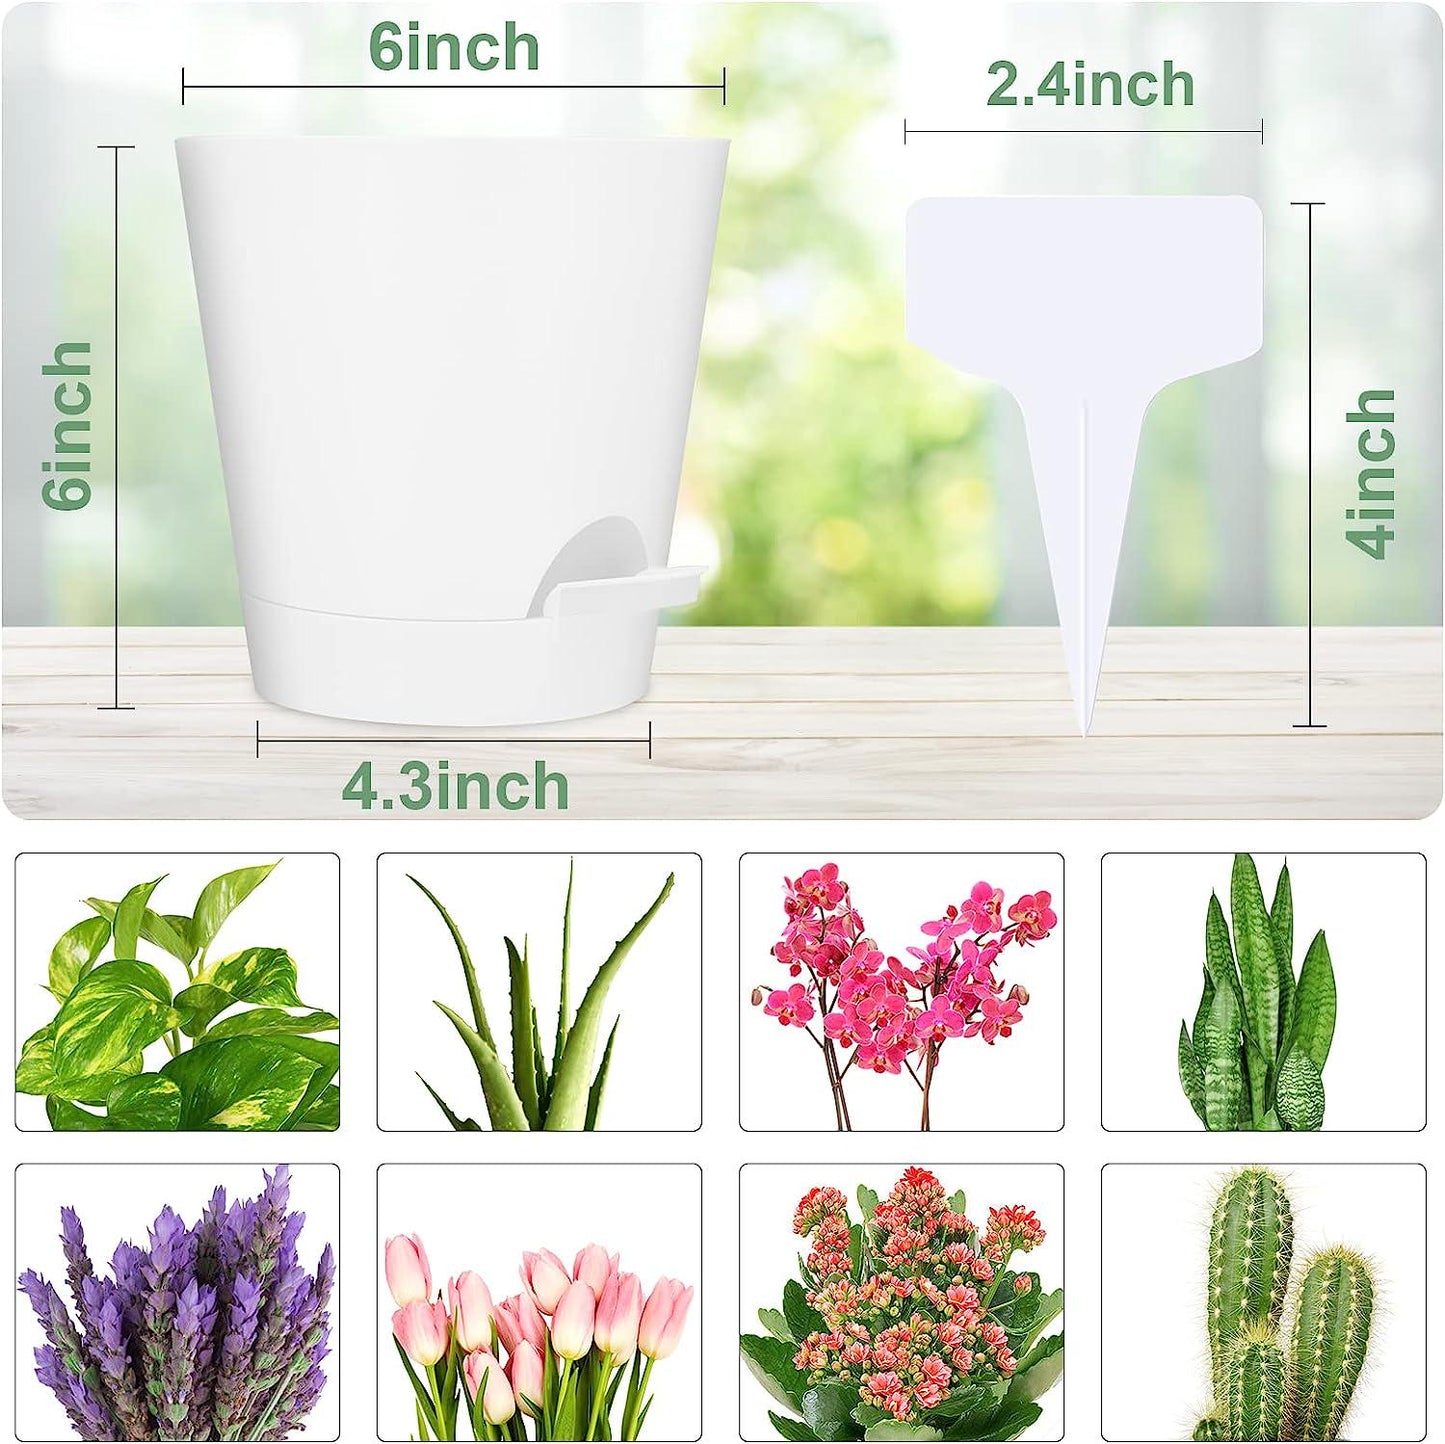 HQMHLCD Plant Pots, 5 Pack 6 Inch Flower Pots Self Watering Plastic Planter with Drainage Hole SaucersÂ for Indoor Outdoor Succulents, Â African Violet Flower Plants (White-6 inch)